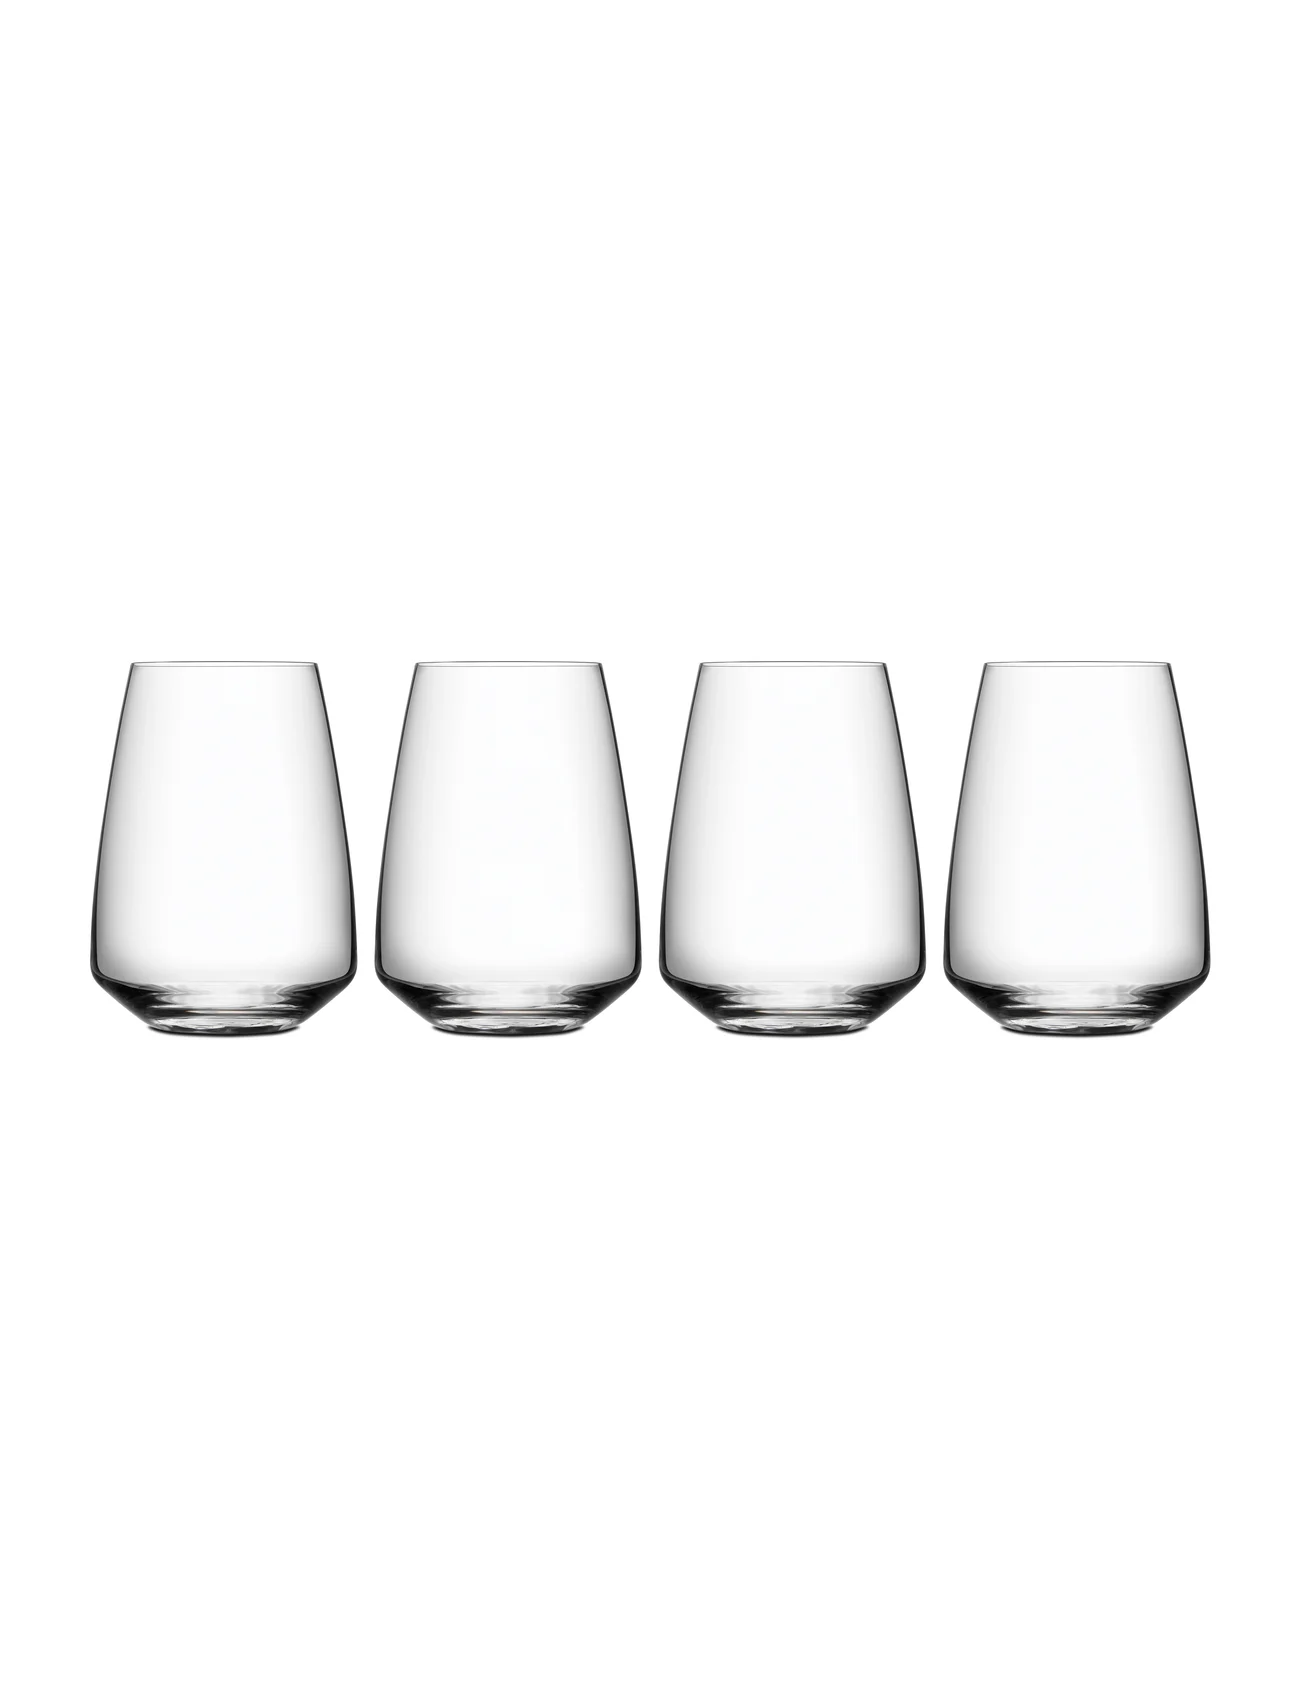 Orrefors - PULSE TUMBLER 4-PACK 35CL - vannglass - clear - 0